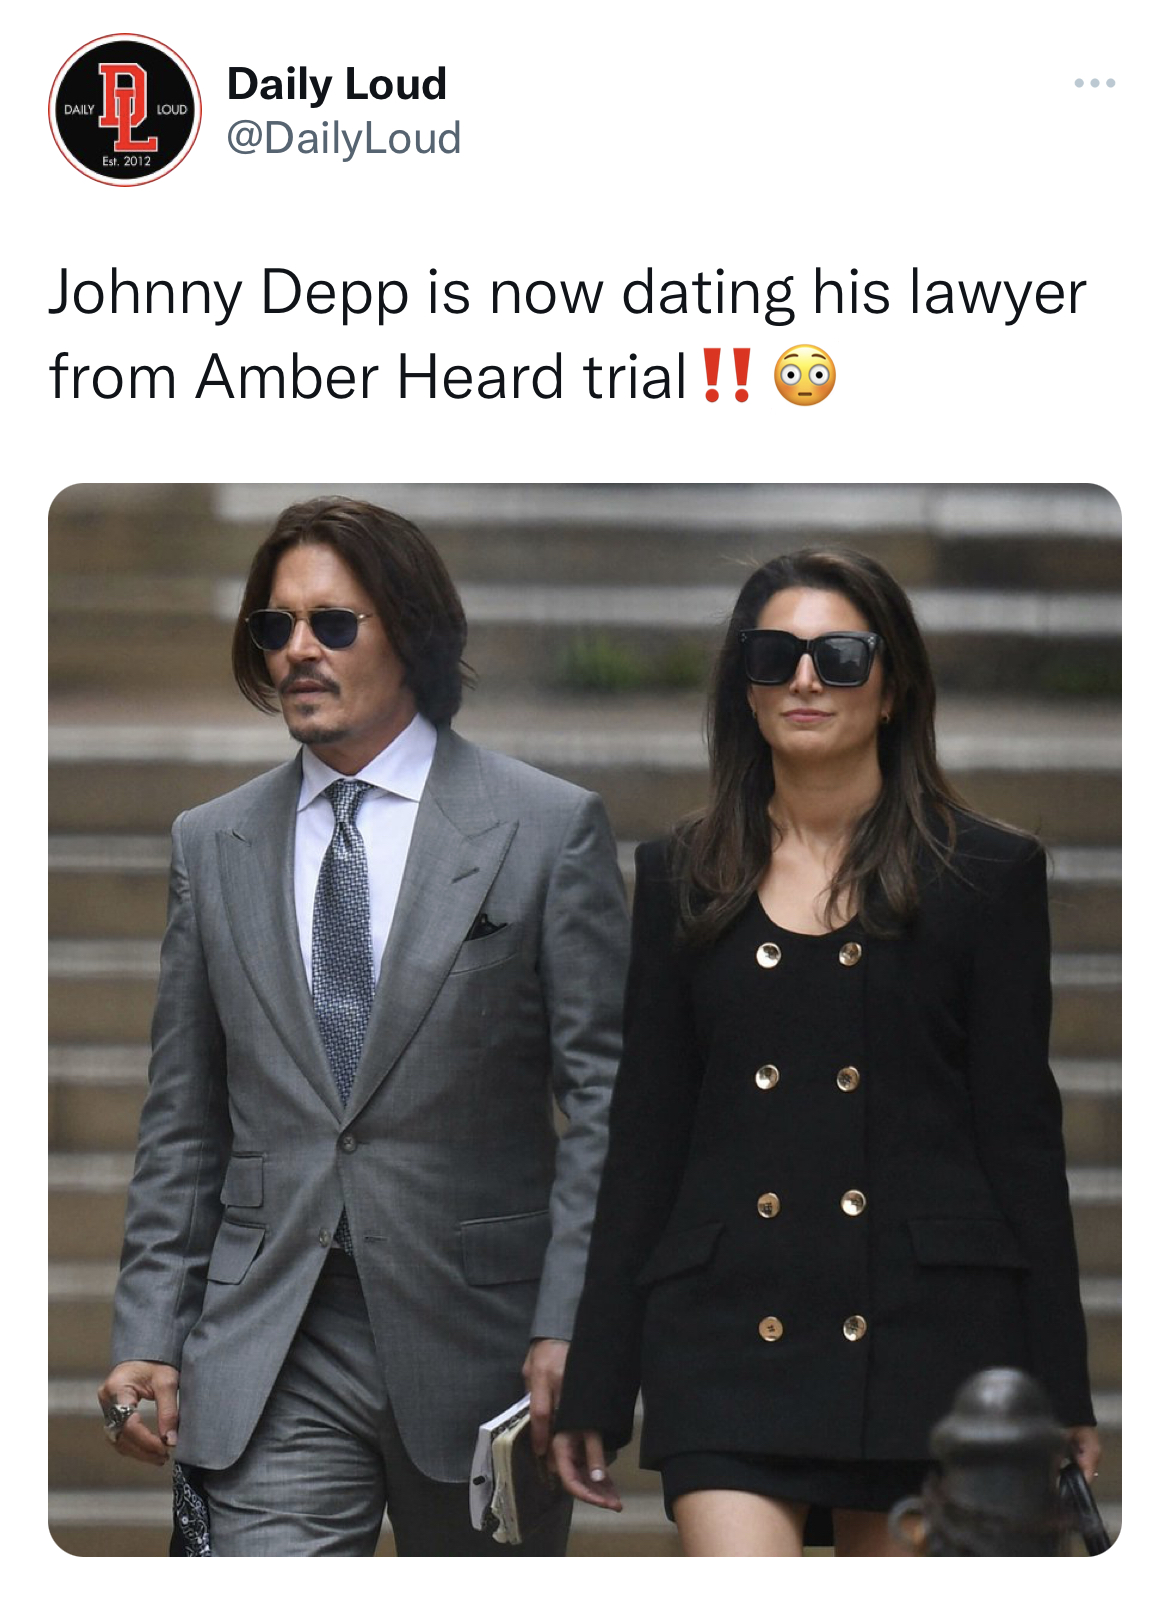 funny tweets - johnny depp lawyer joelle - D Daily Loud Johnny Depp is now dating his lawyer from Amber Heard trial!!